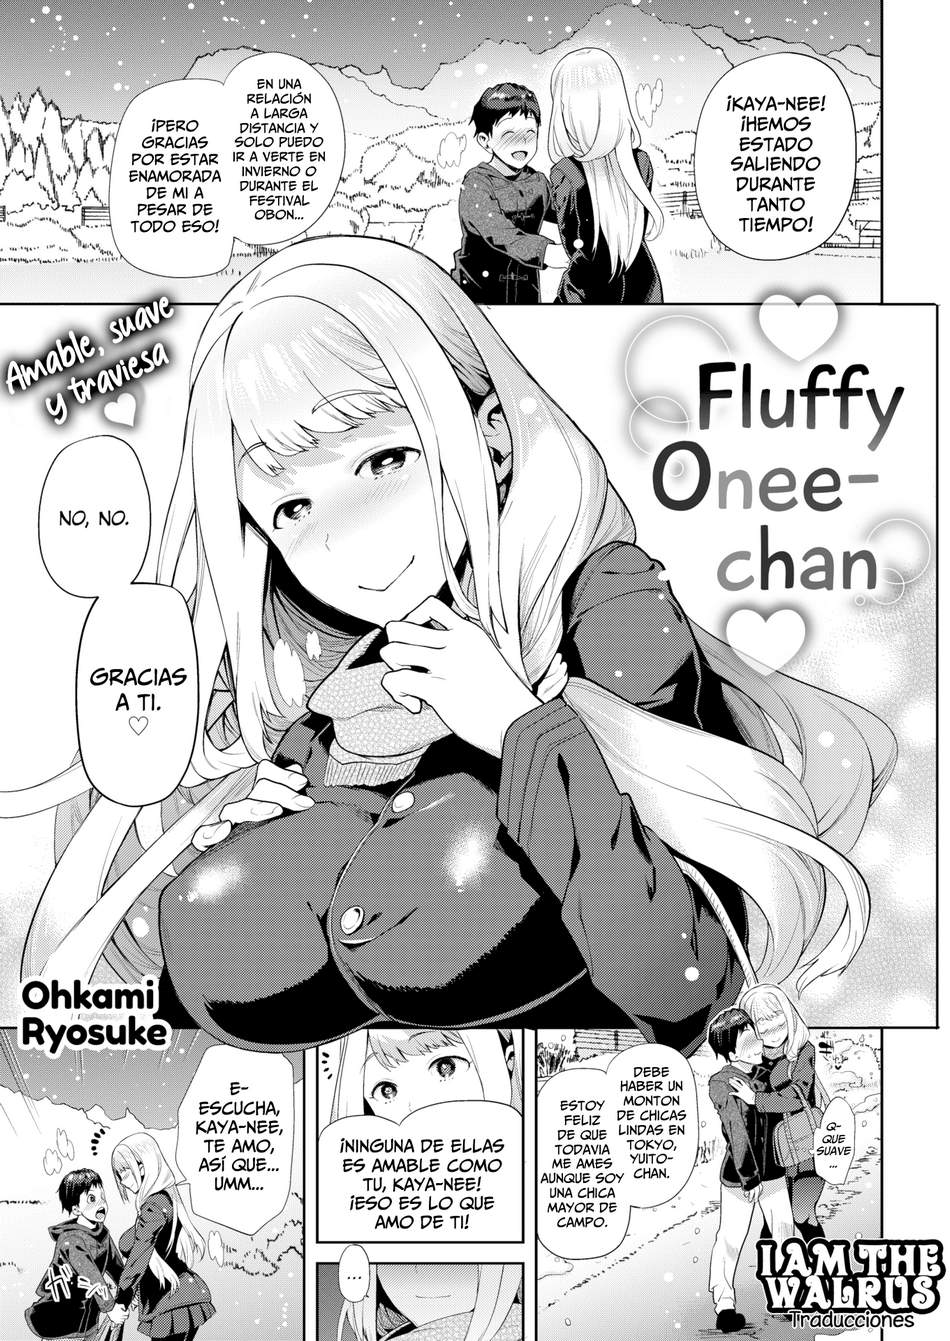 Fluffly Onee-chan - Page #1